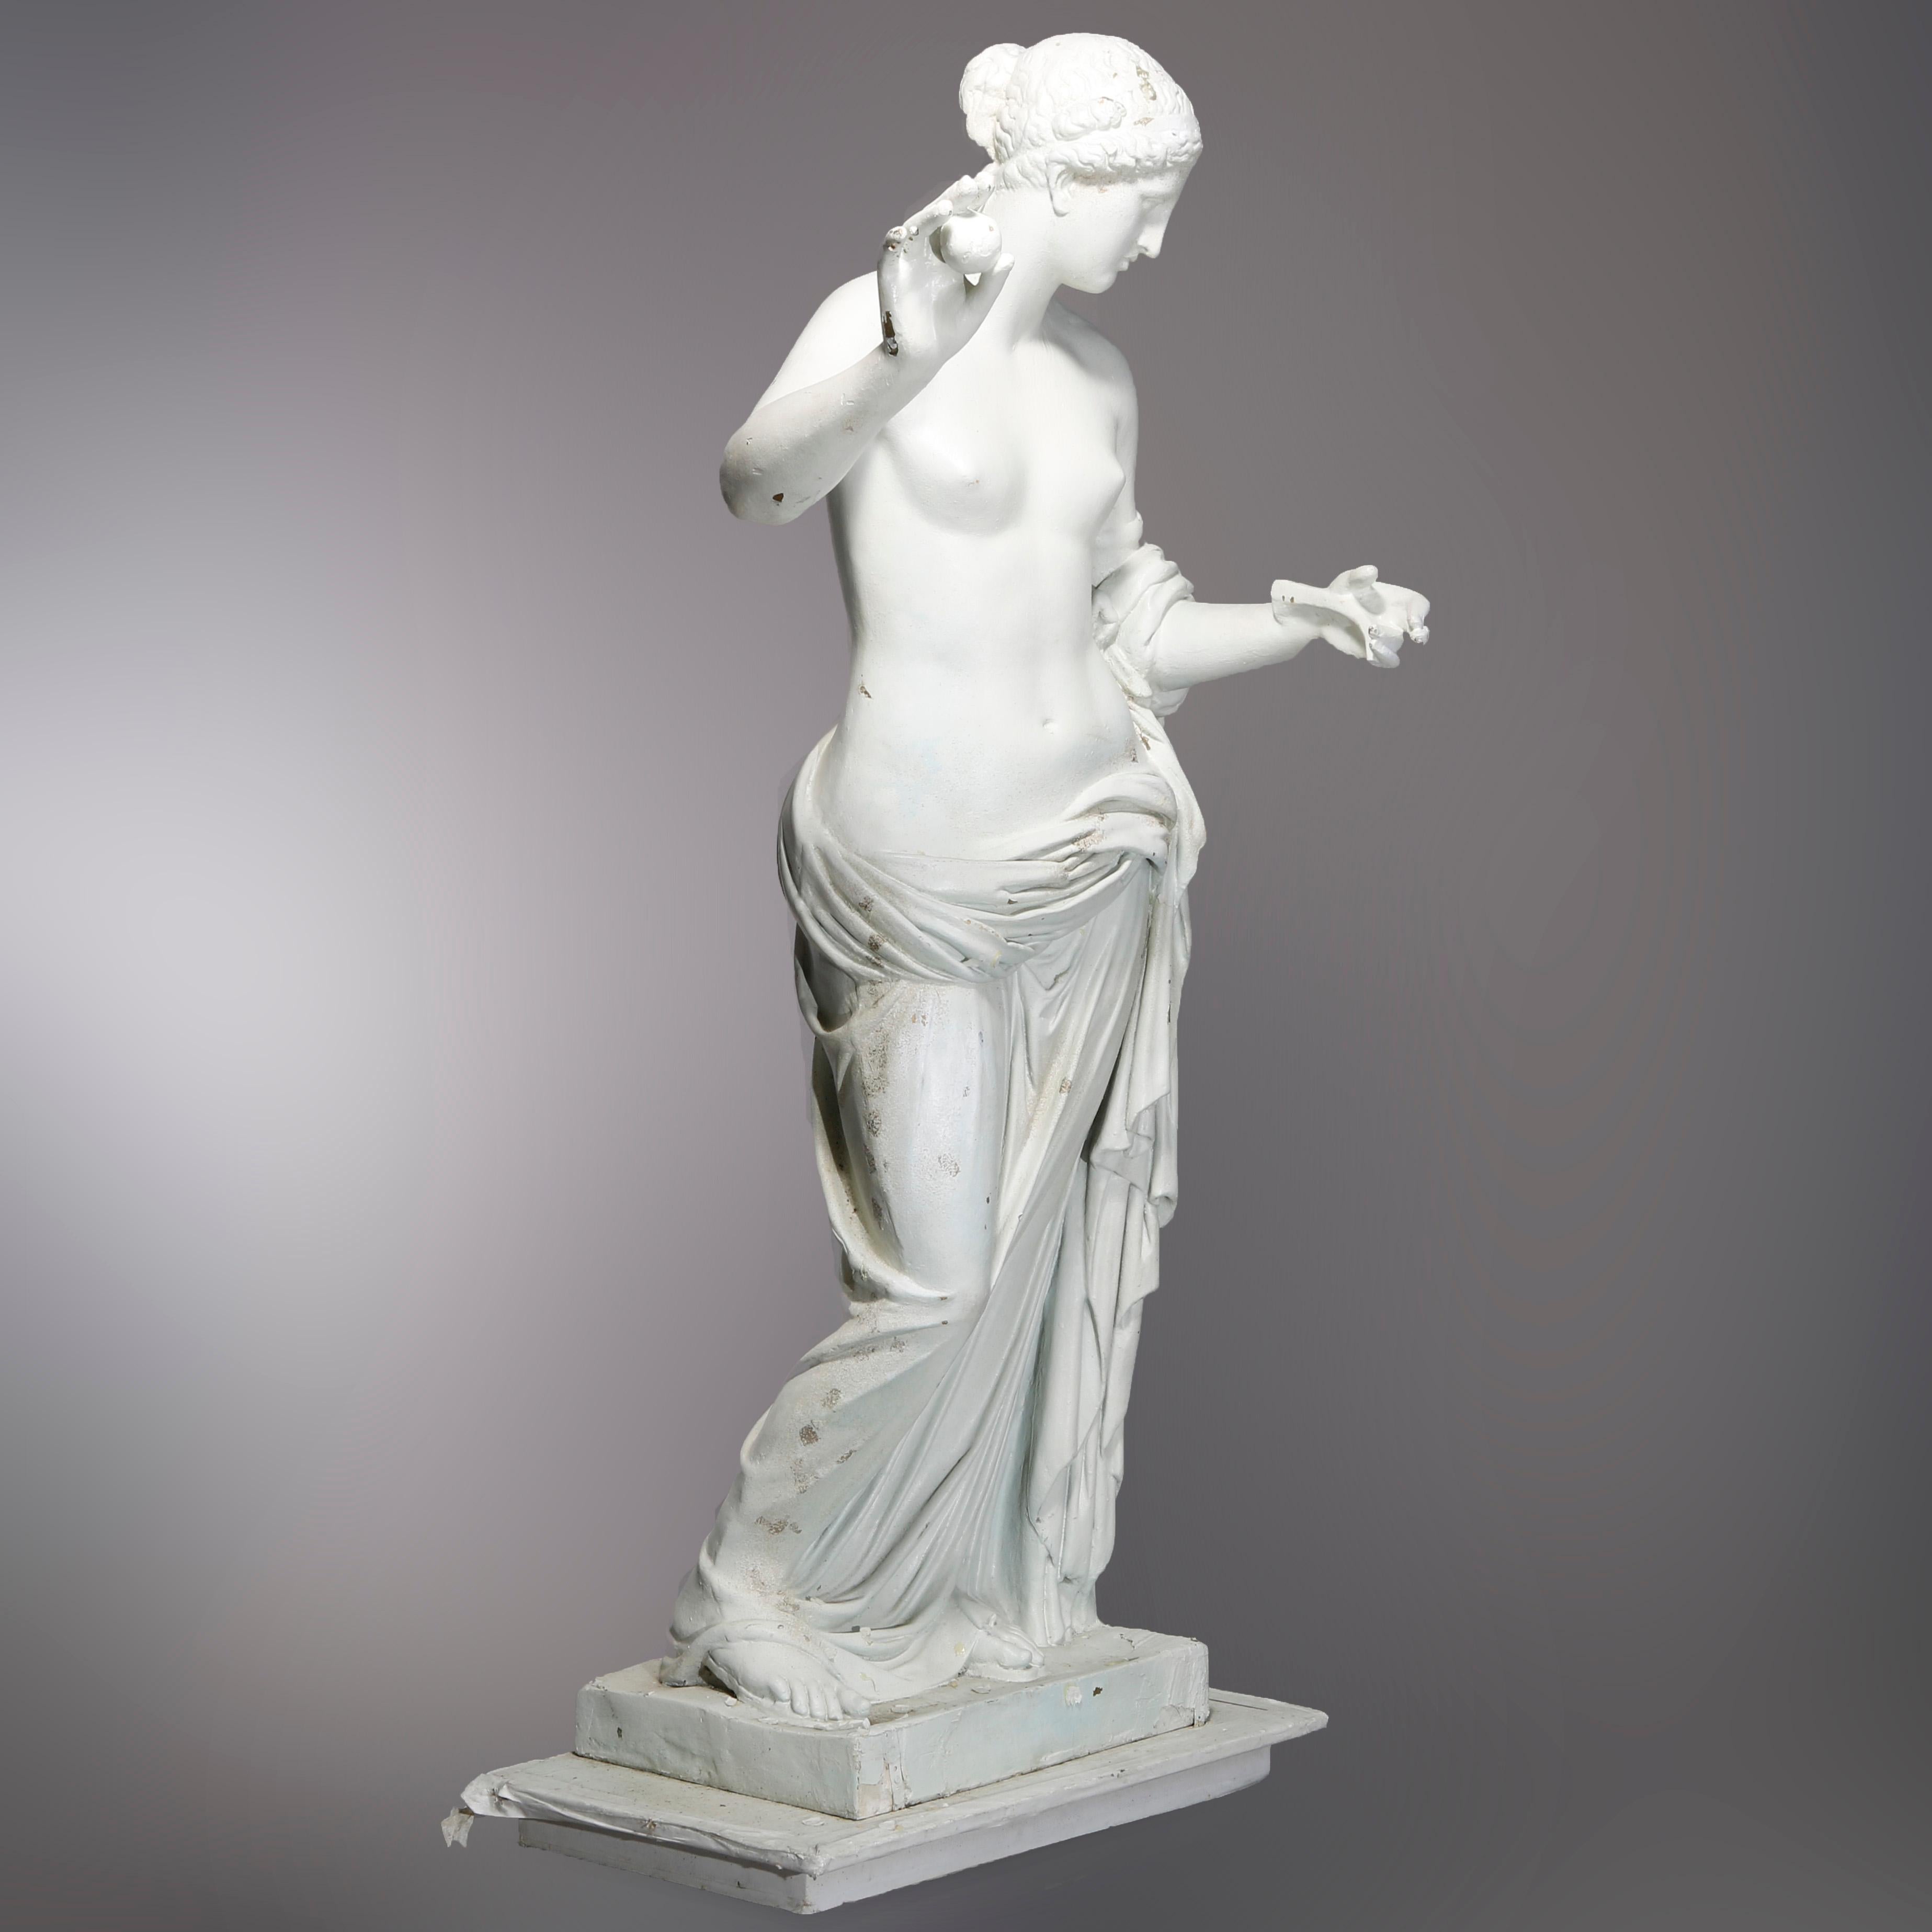 An antique monumental composite resin sculpture depicts the Classical Venus of Arles with apple as displayed at Musee du Louvre, Paris, France, Circa 1920

Measures: 84